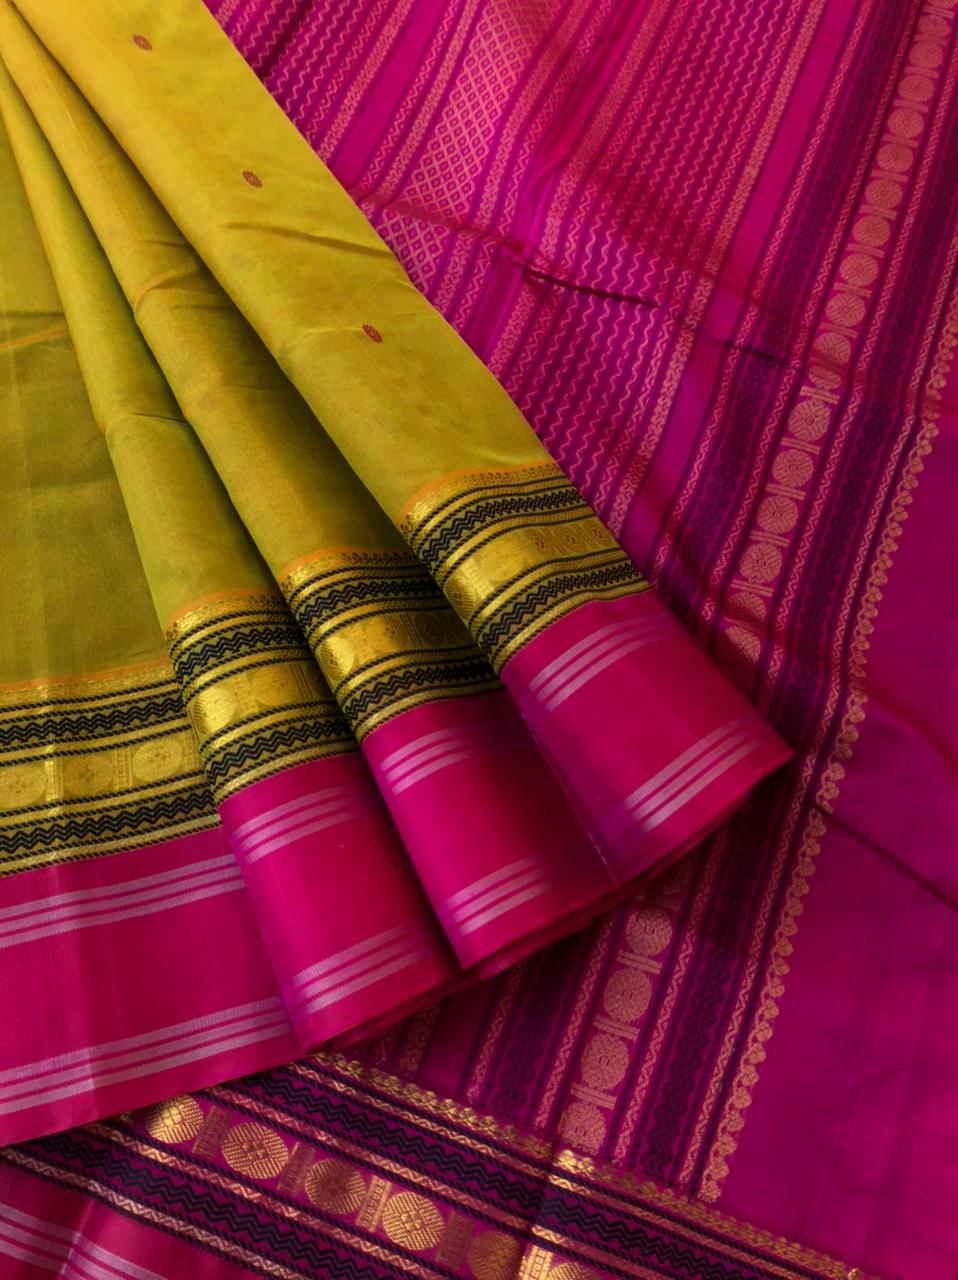 Divyam - Korvai Silk Cotton with Pure Silk Woven Borders - rusty green mixed mustard with deep pink